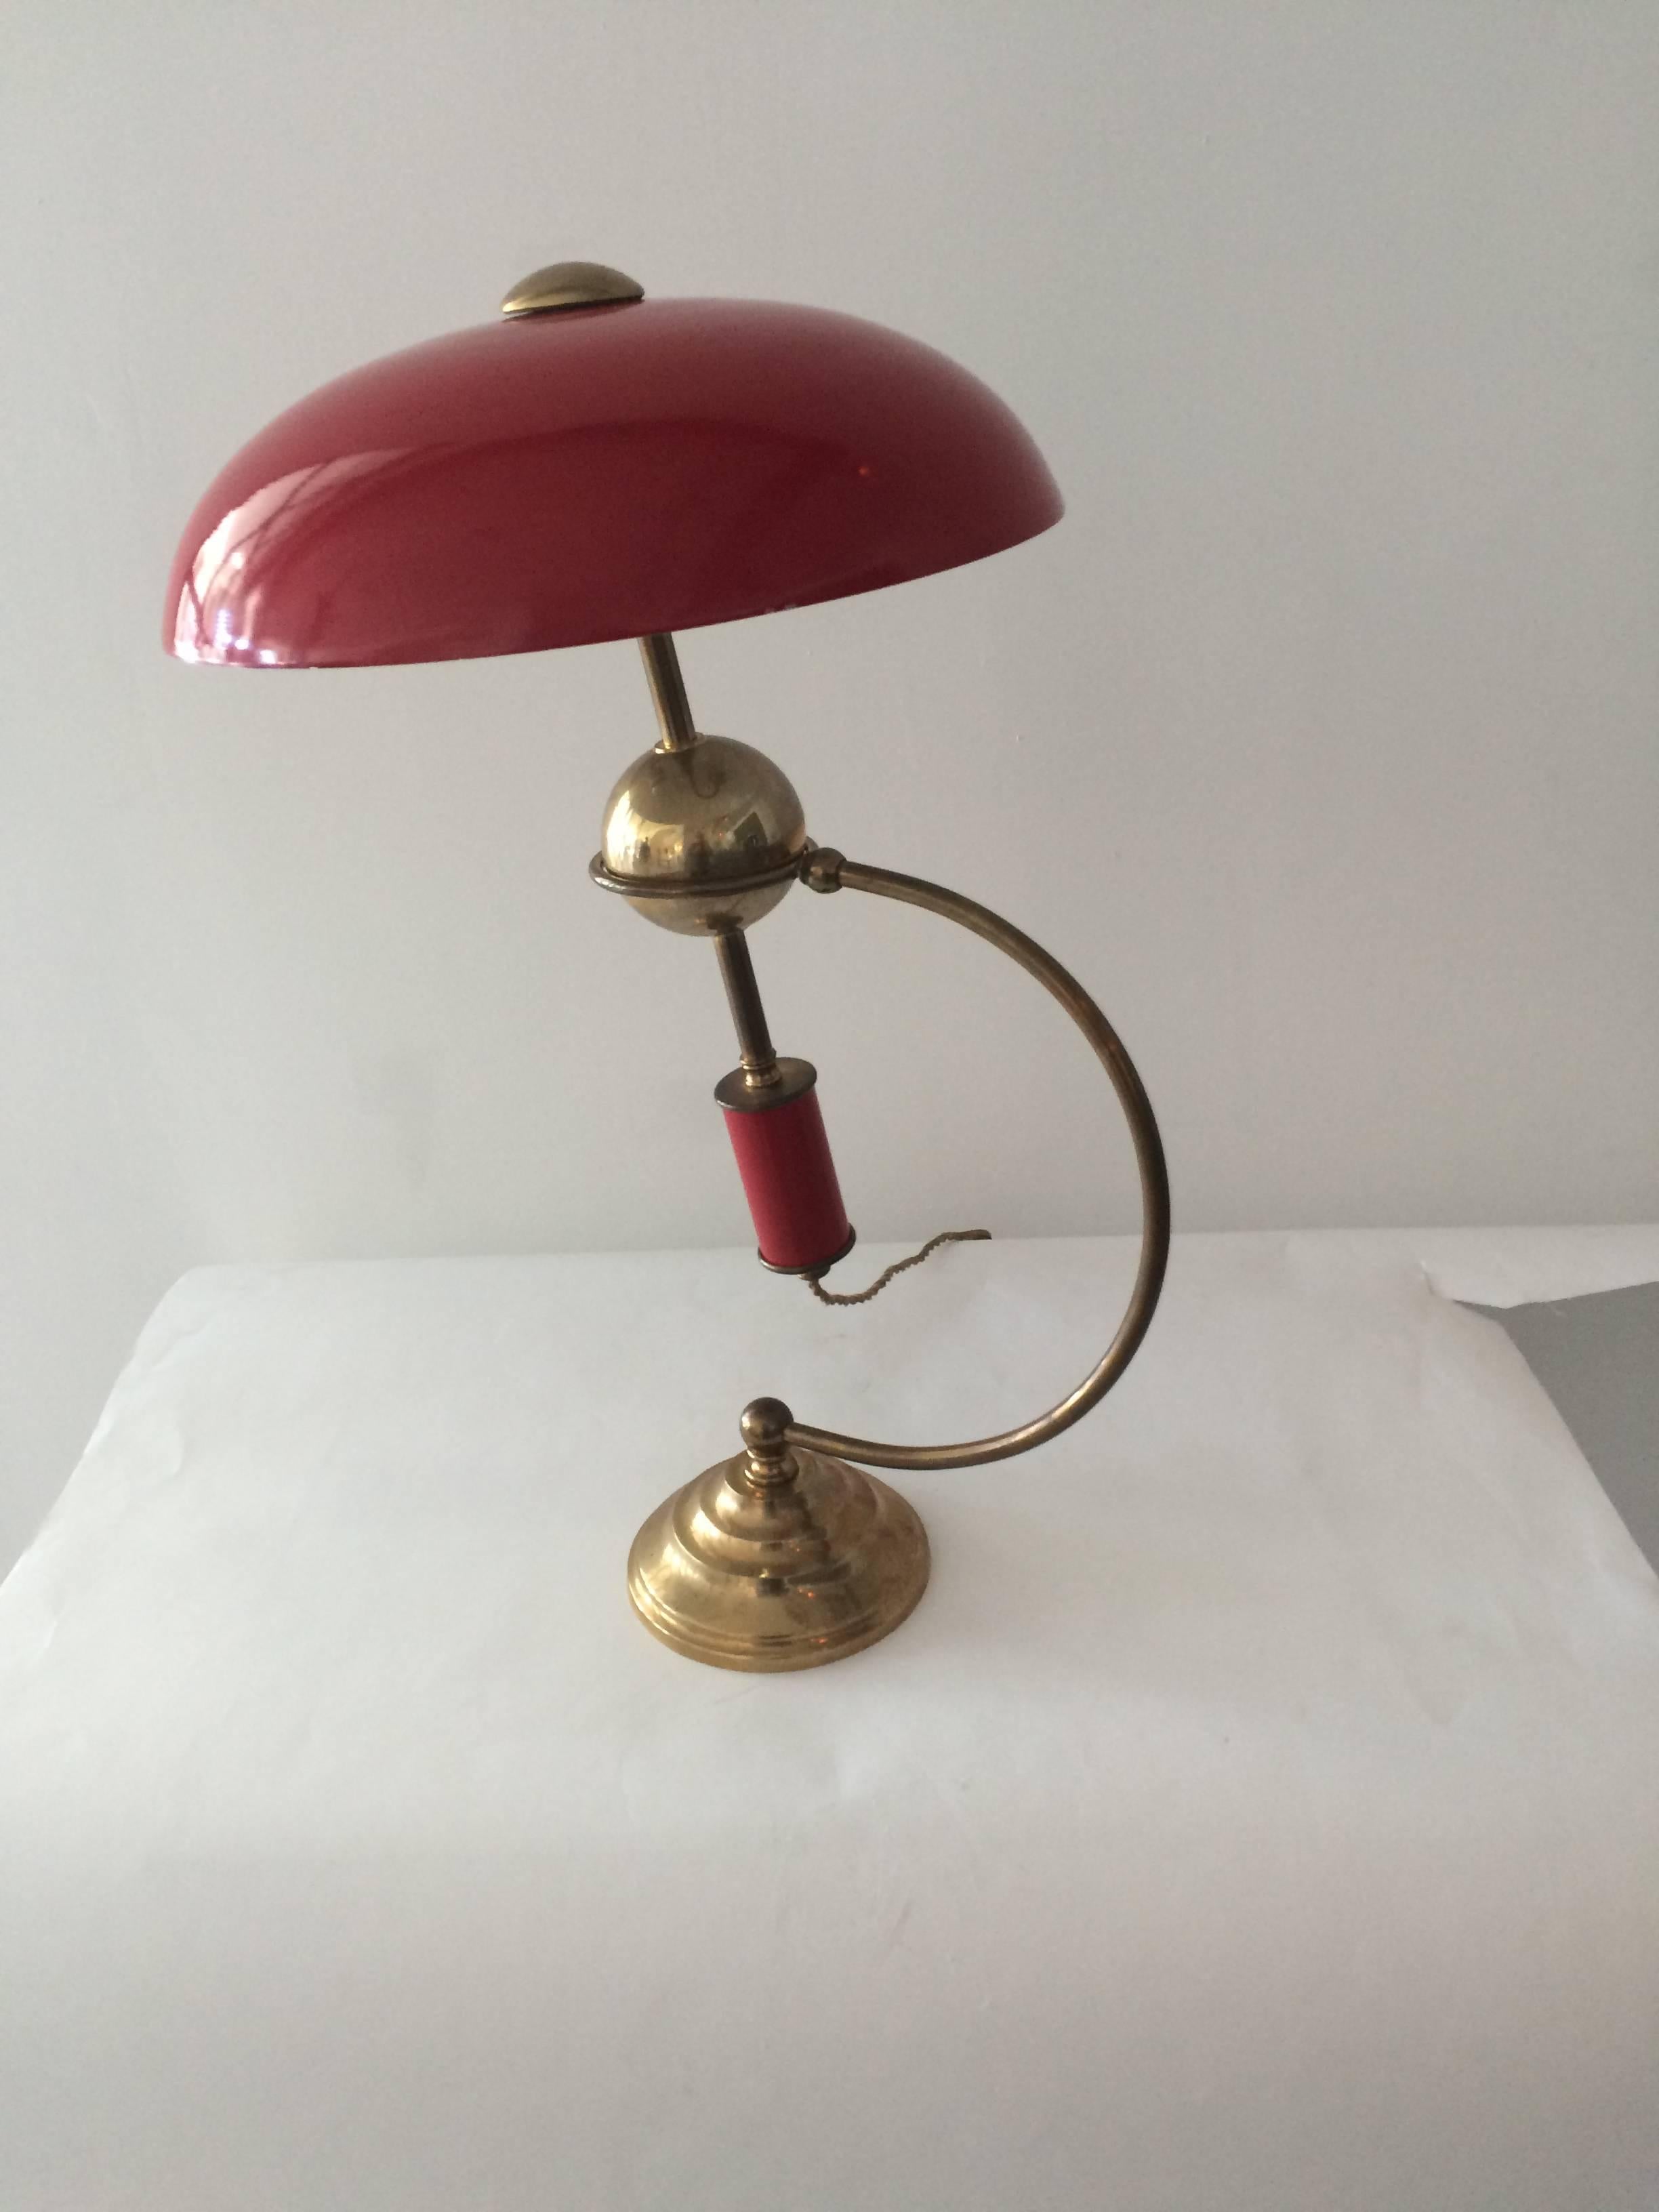 Most beautiful Two-Tone Italian Brass and Red Table Lamp, 1950s. Adjustable with counter-balance. 